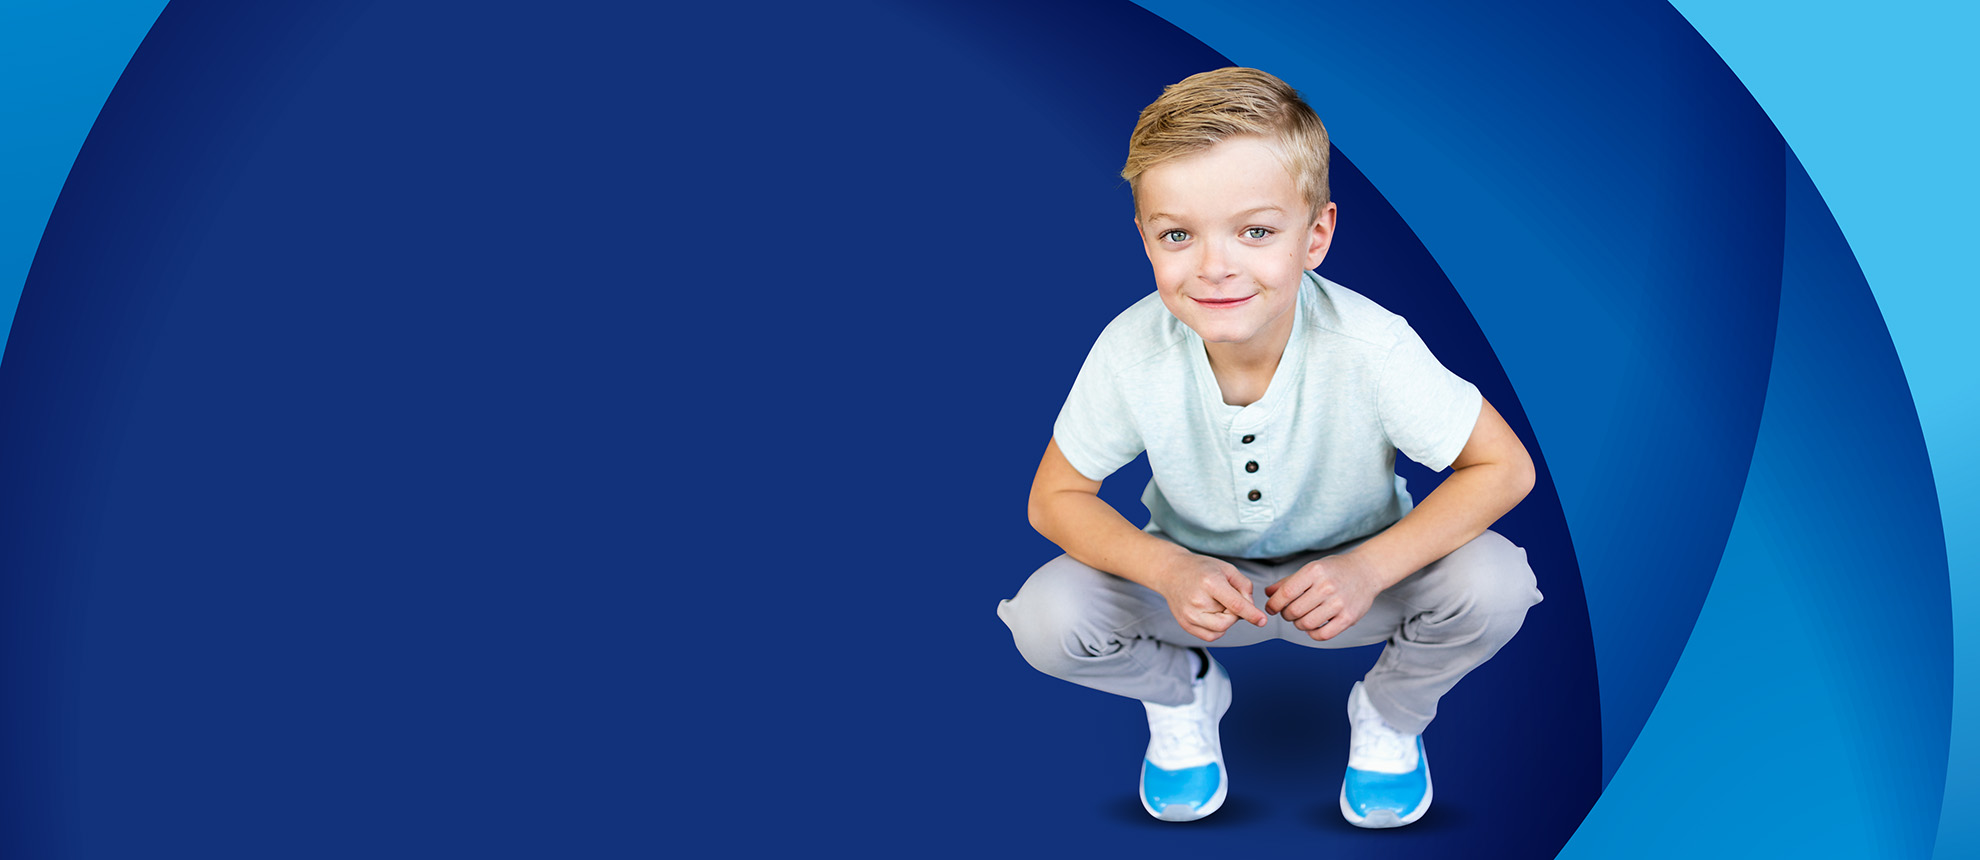 young boy with blue background